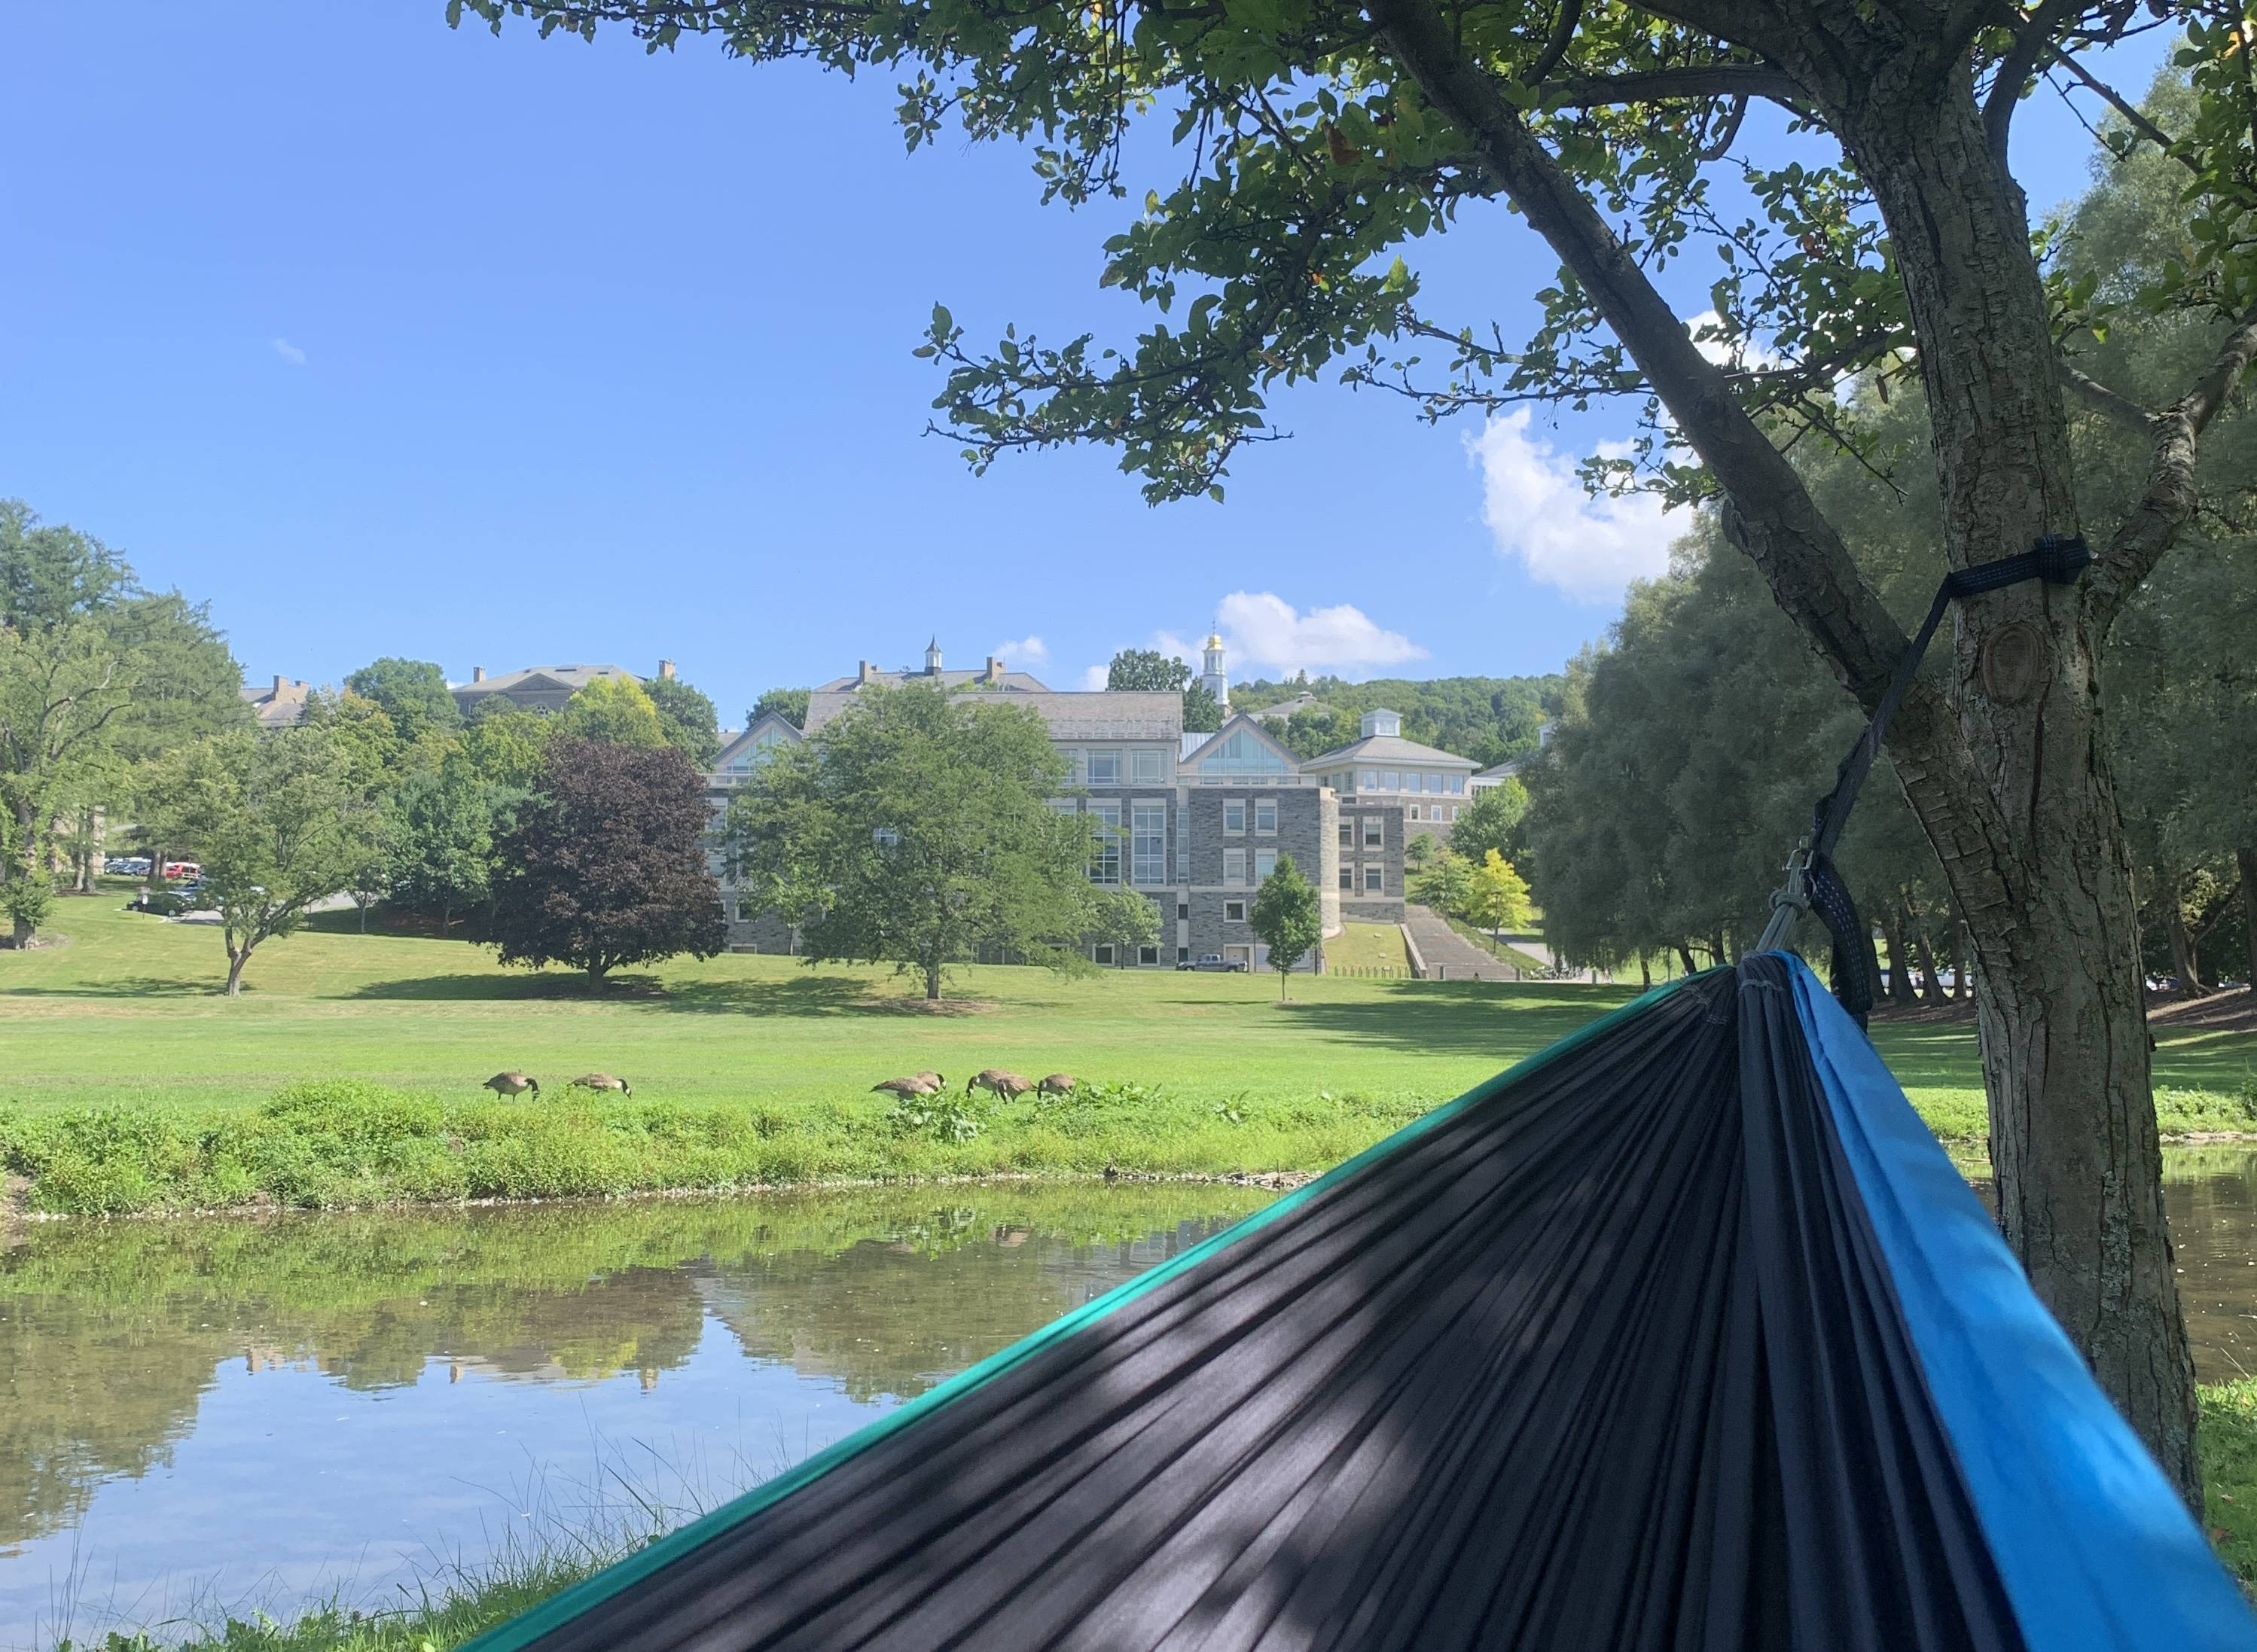 One of Hailey’s prime hammocking spots overlooking Taylor Lake and Case Library